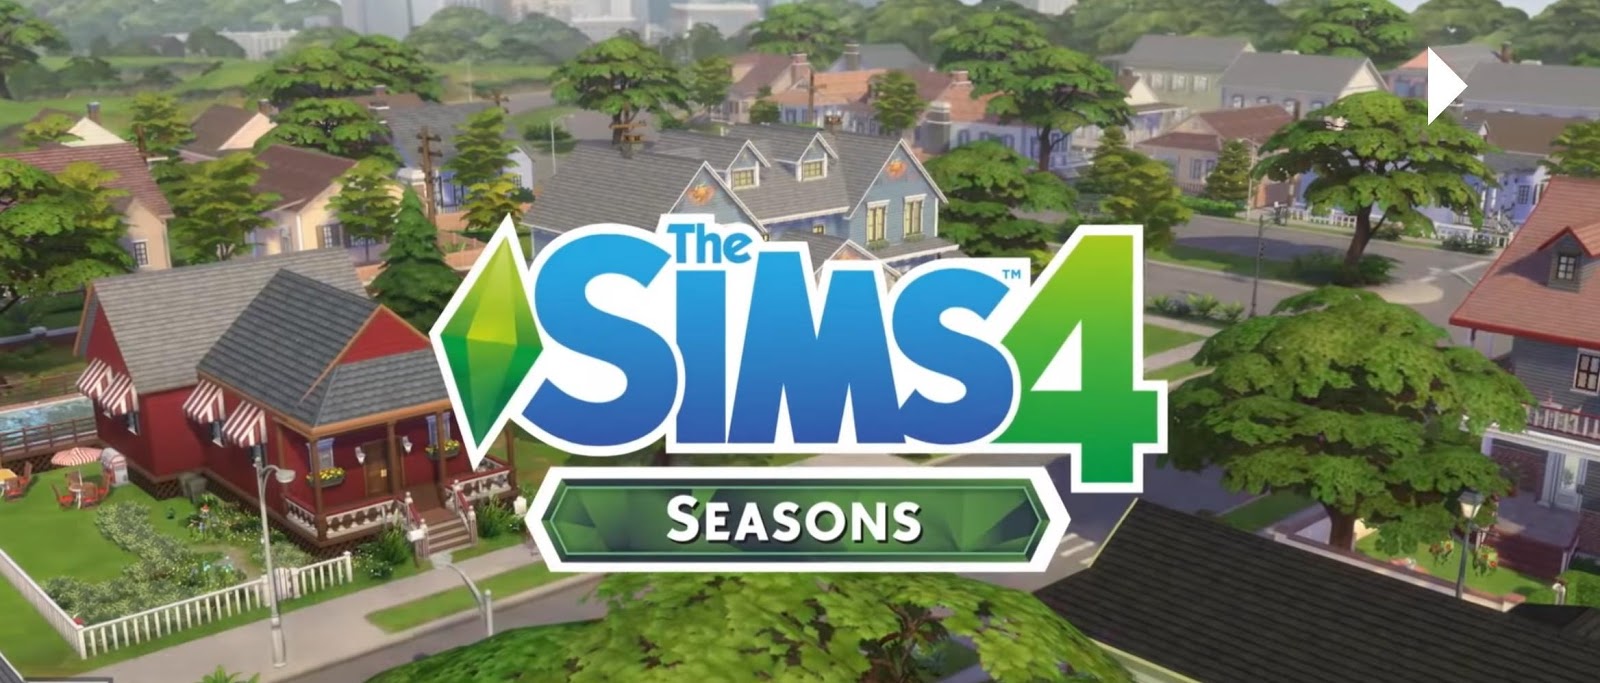 sims 4 all dlc free download 2018 pc